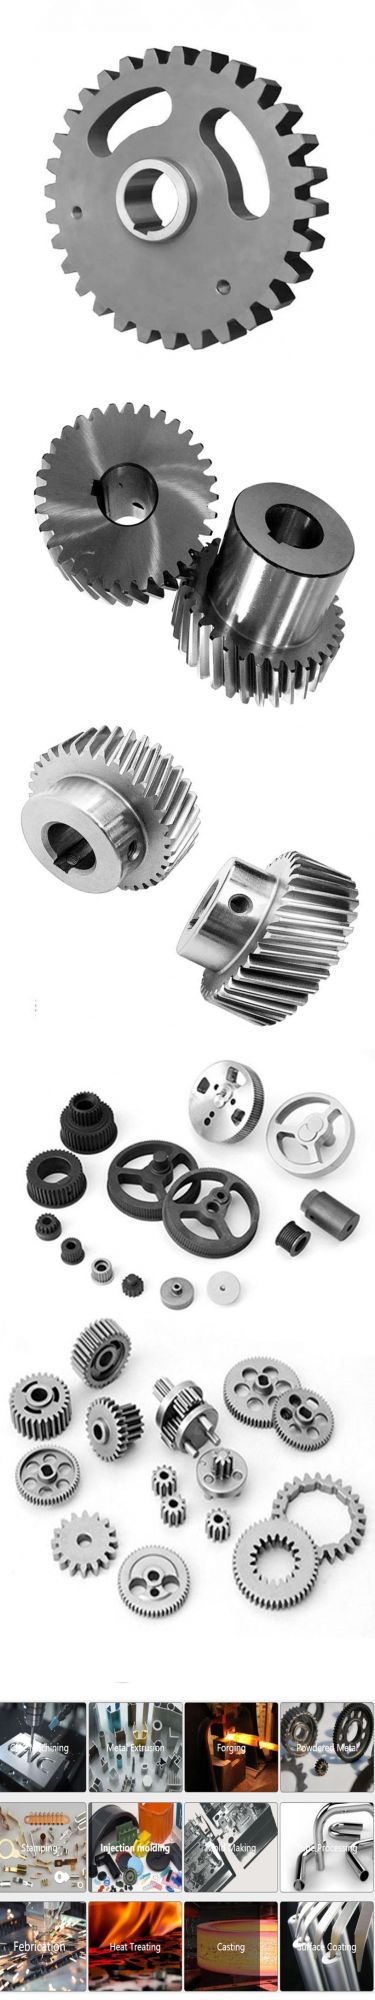 Transmission Gears for Agricultural Motorcycles